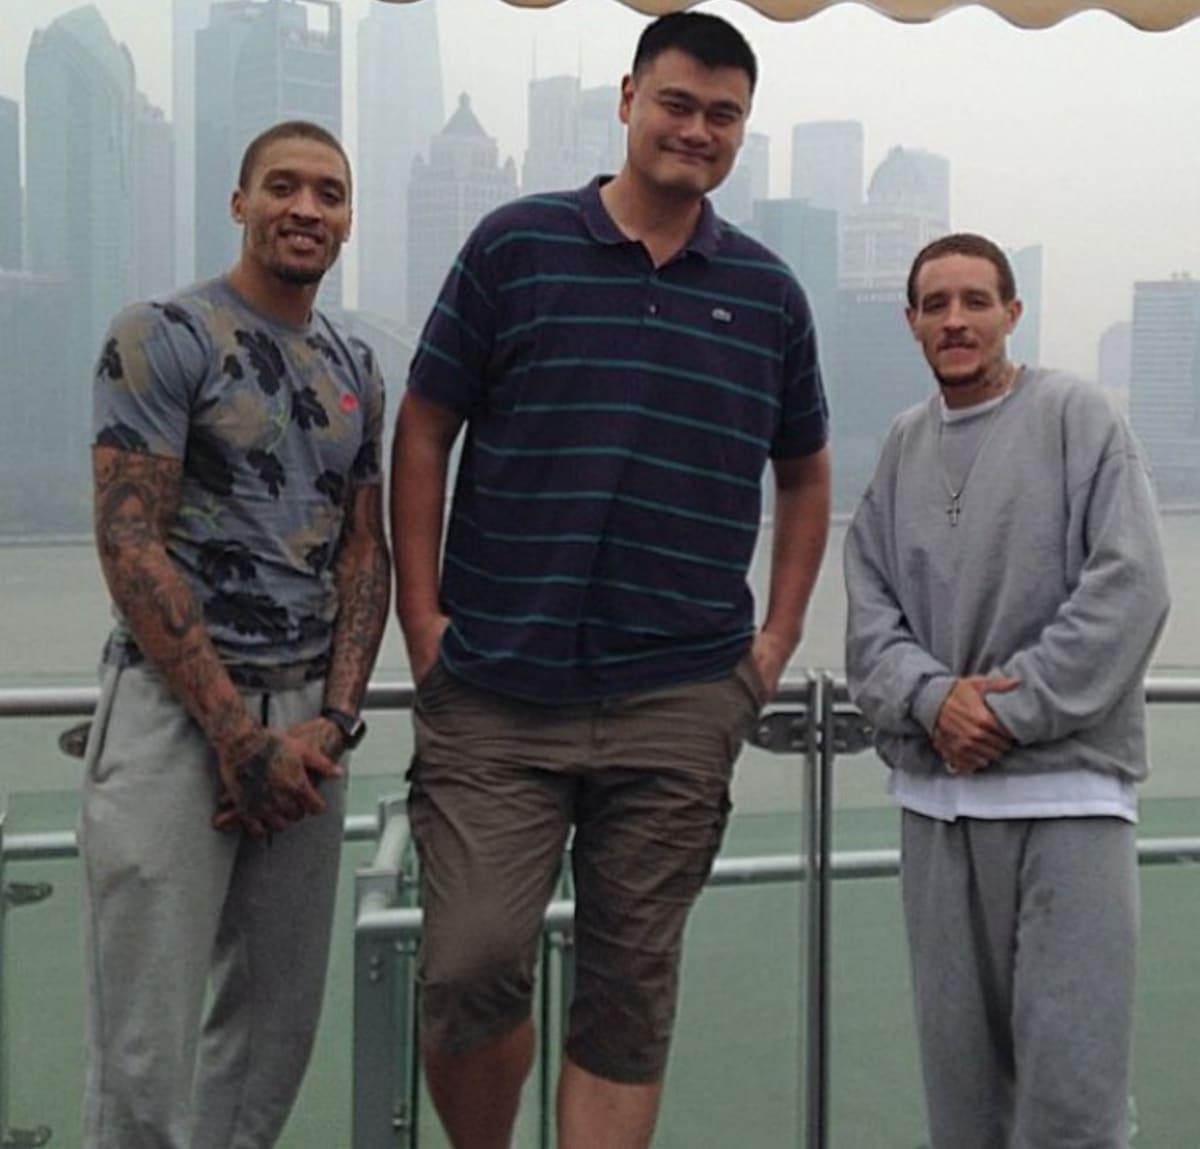 Michael Beasley, Yao Ming, and Delonte West Chilling in China | Complex1200 x 1149